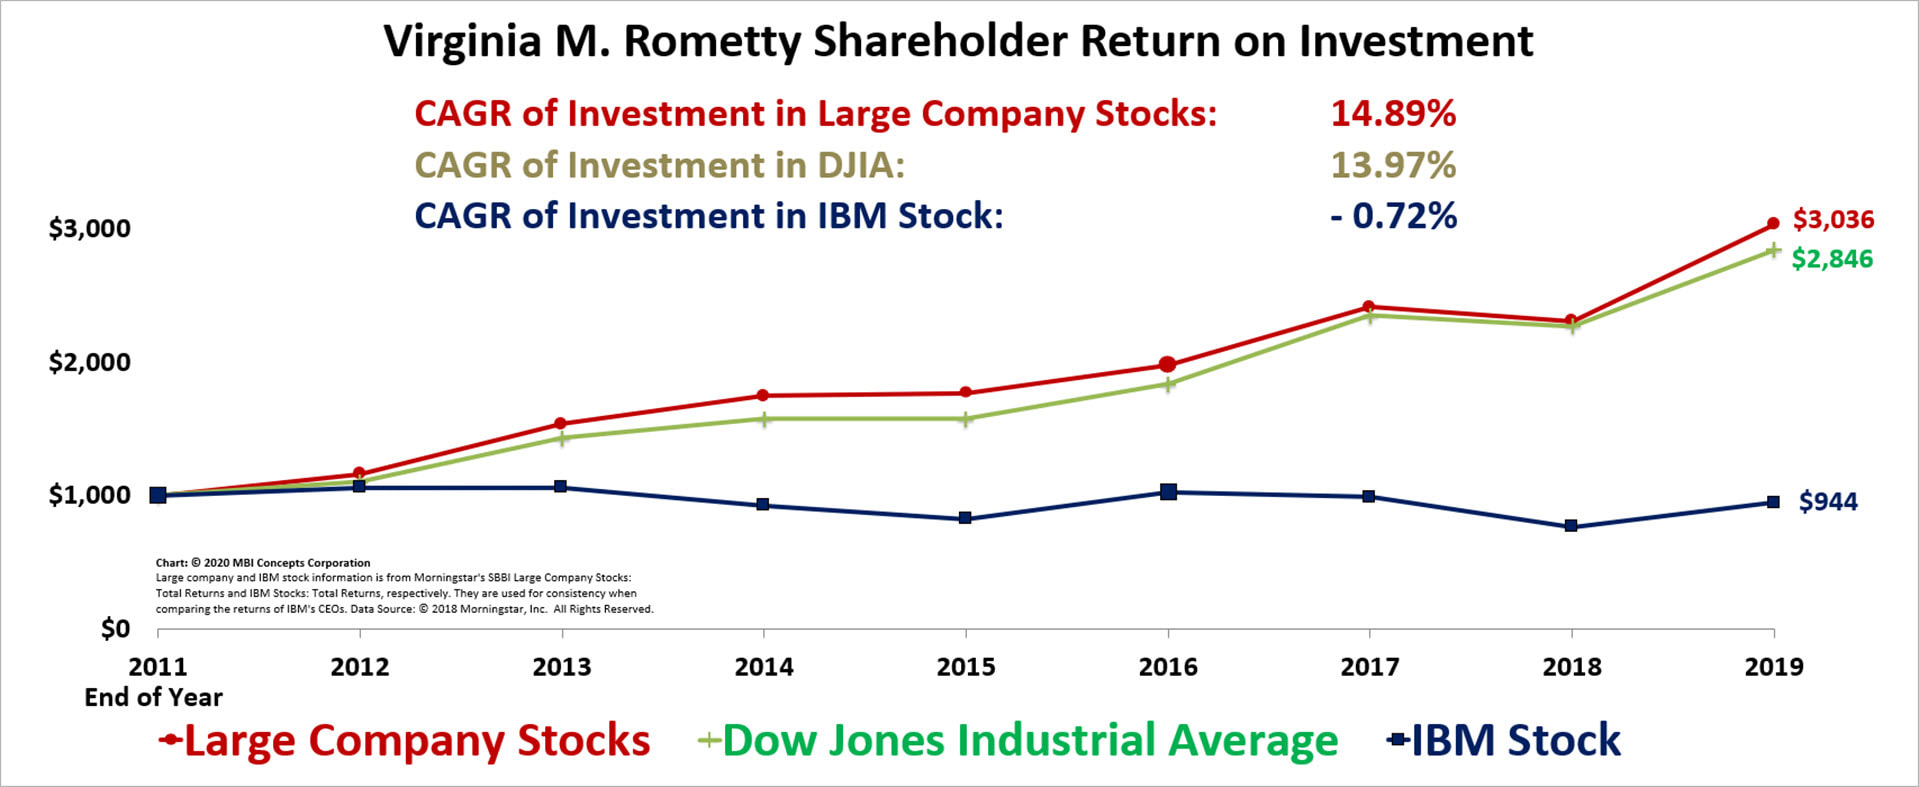 Chart of Virginia M. Rometty's Shareholder Return on Investment compared with the Dow Jones Industrial Average (DJIA) and Large Company Stocks.